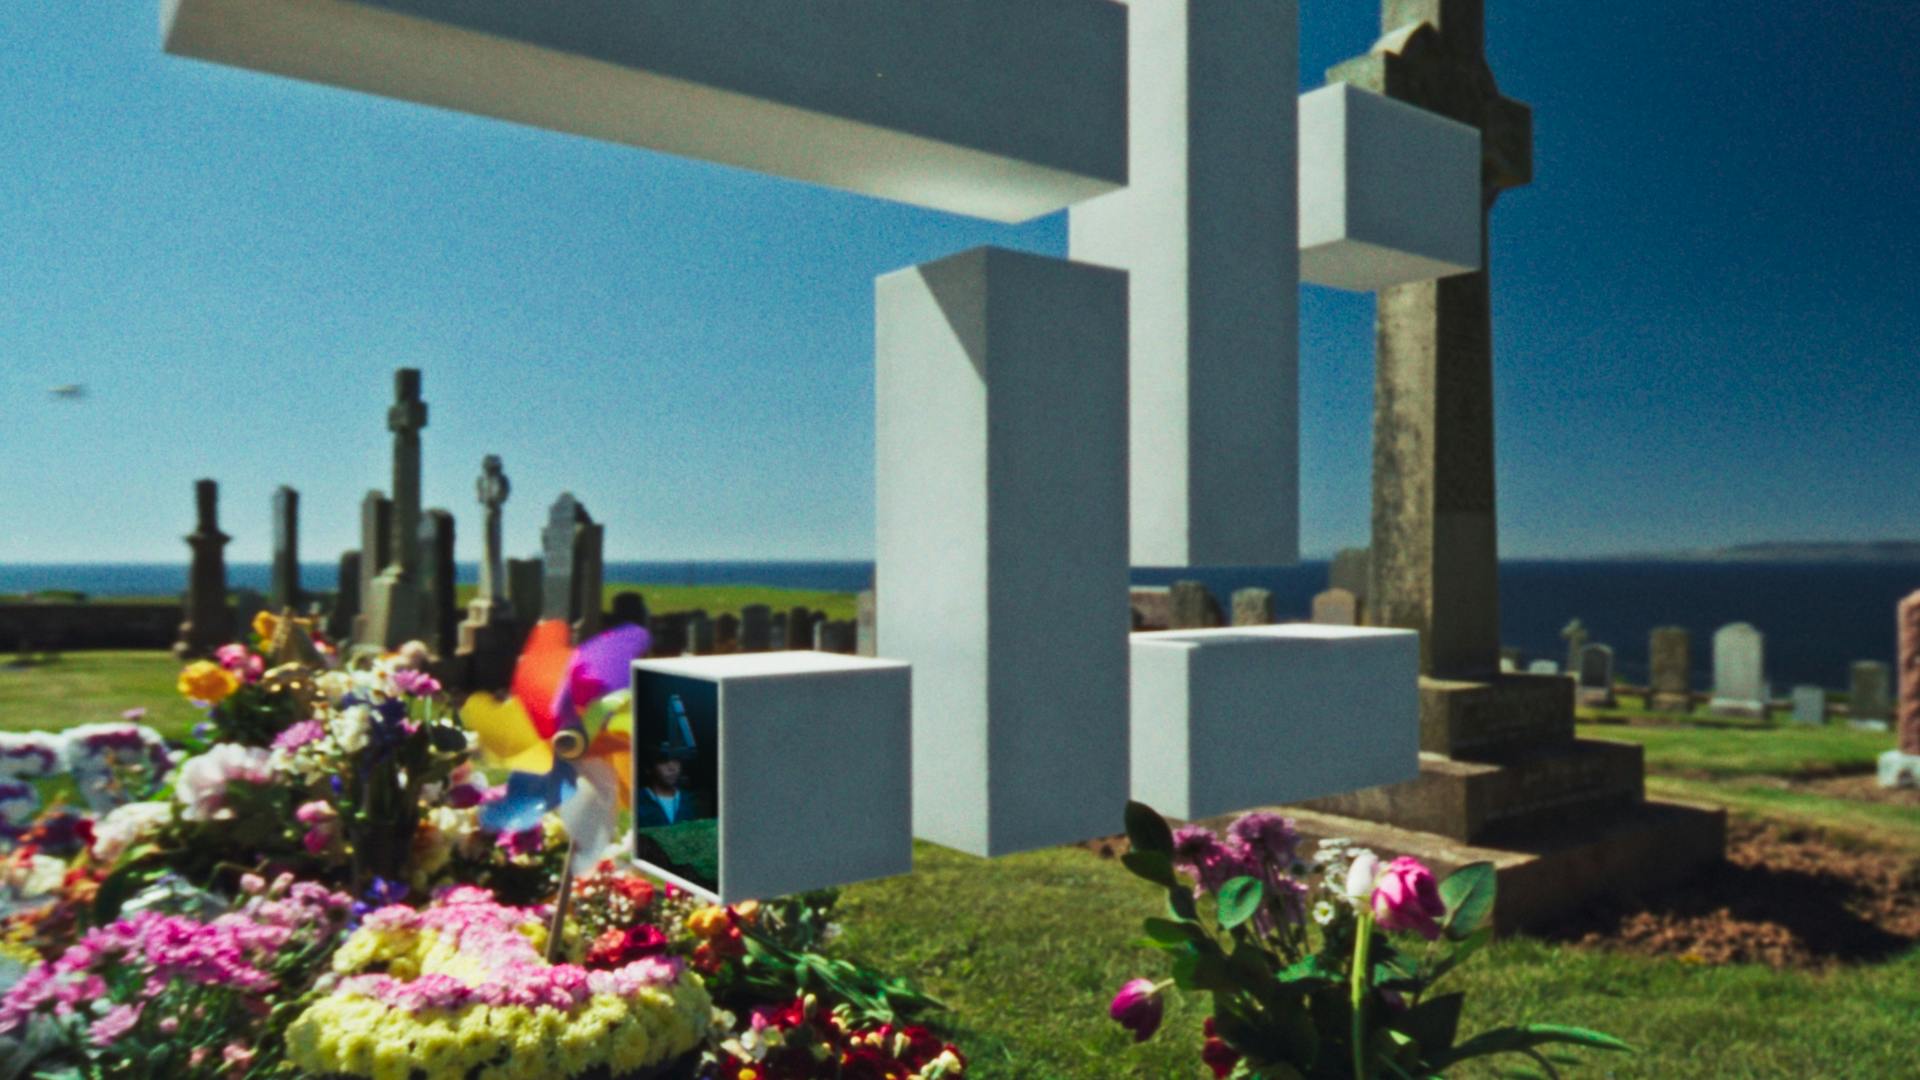 Still image from the new Channel 4 idents showing the 4 logo in 3D, floating above a graveyard filled with flowers by the coast